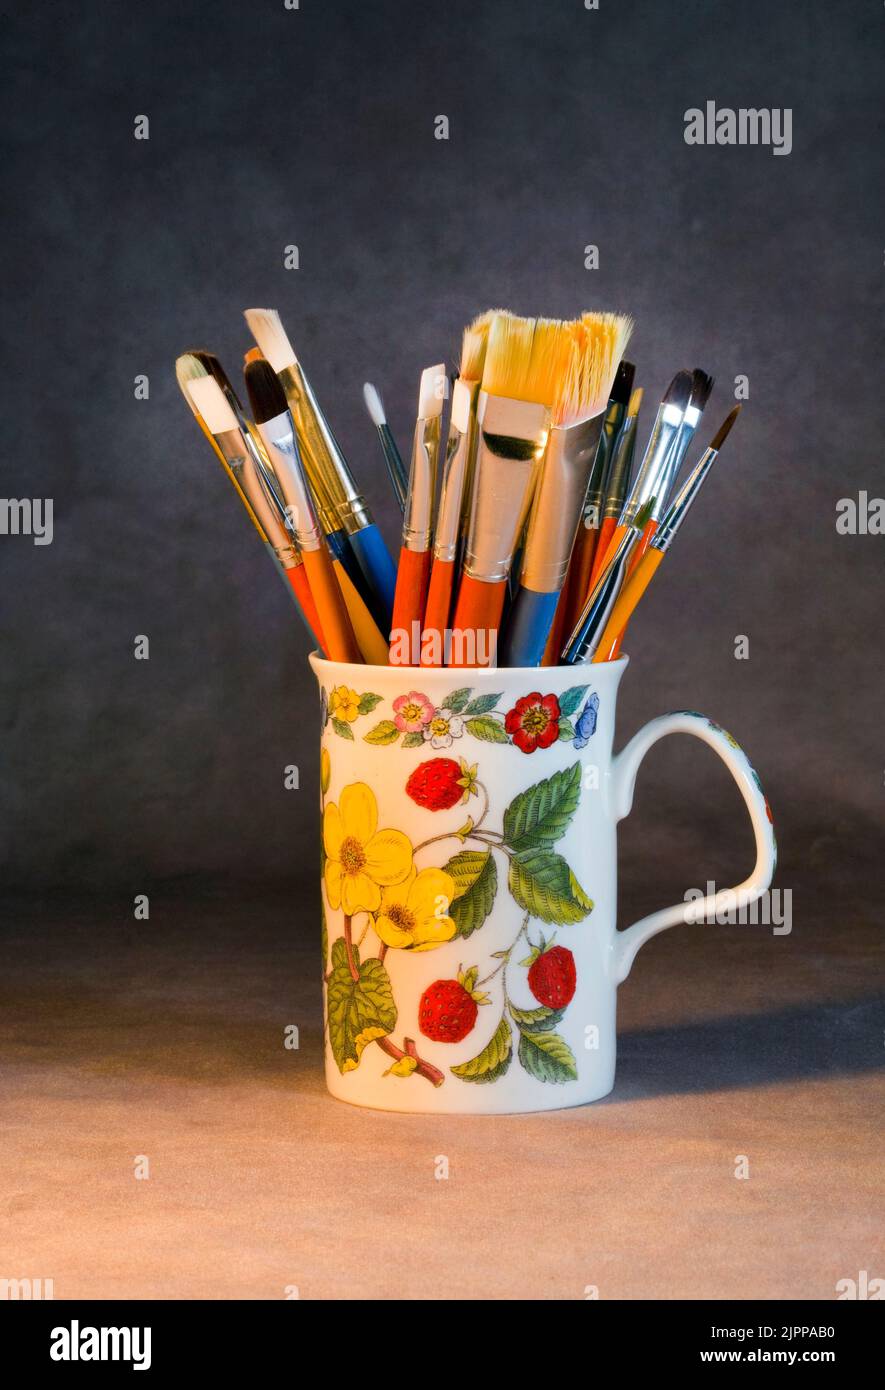 A cup filled with paint b rushes in an artists studio in Oregon. Stock Photo